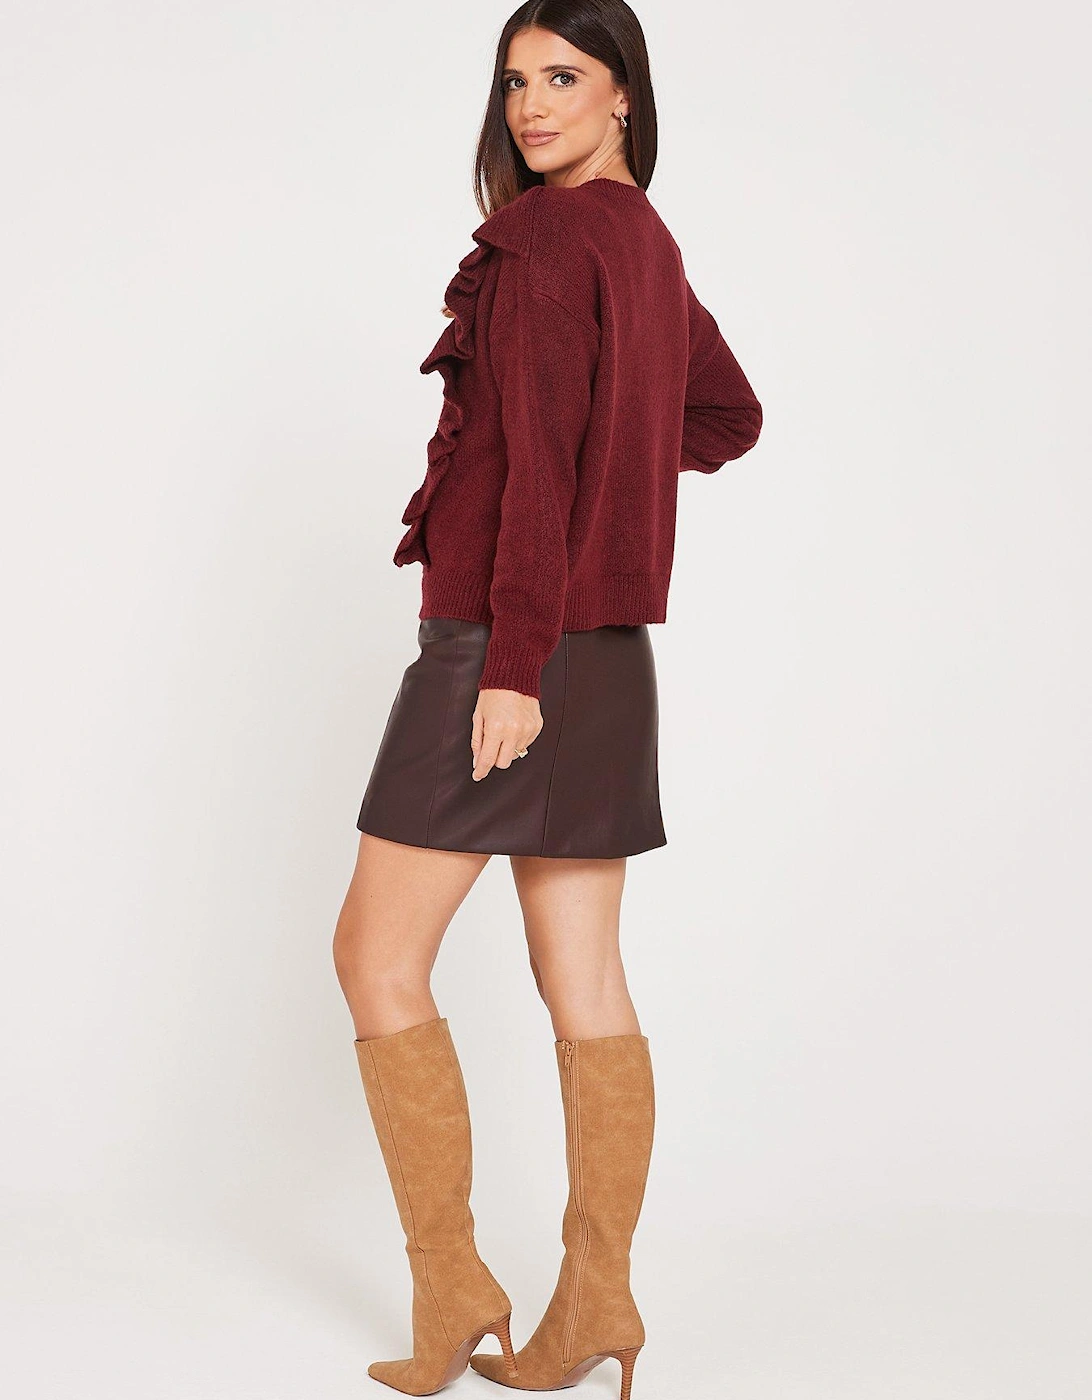 x V by Very Frill Detail Jumper - Wine